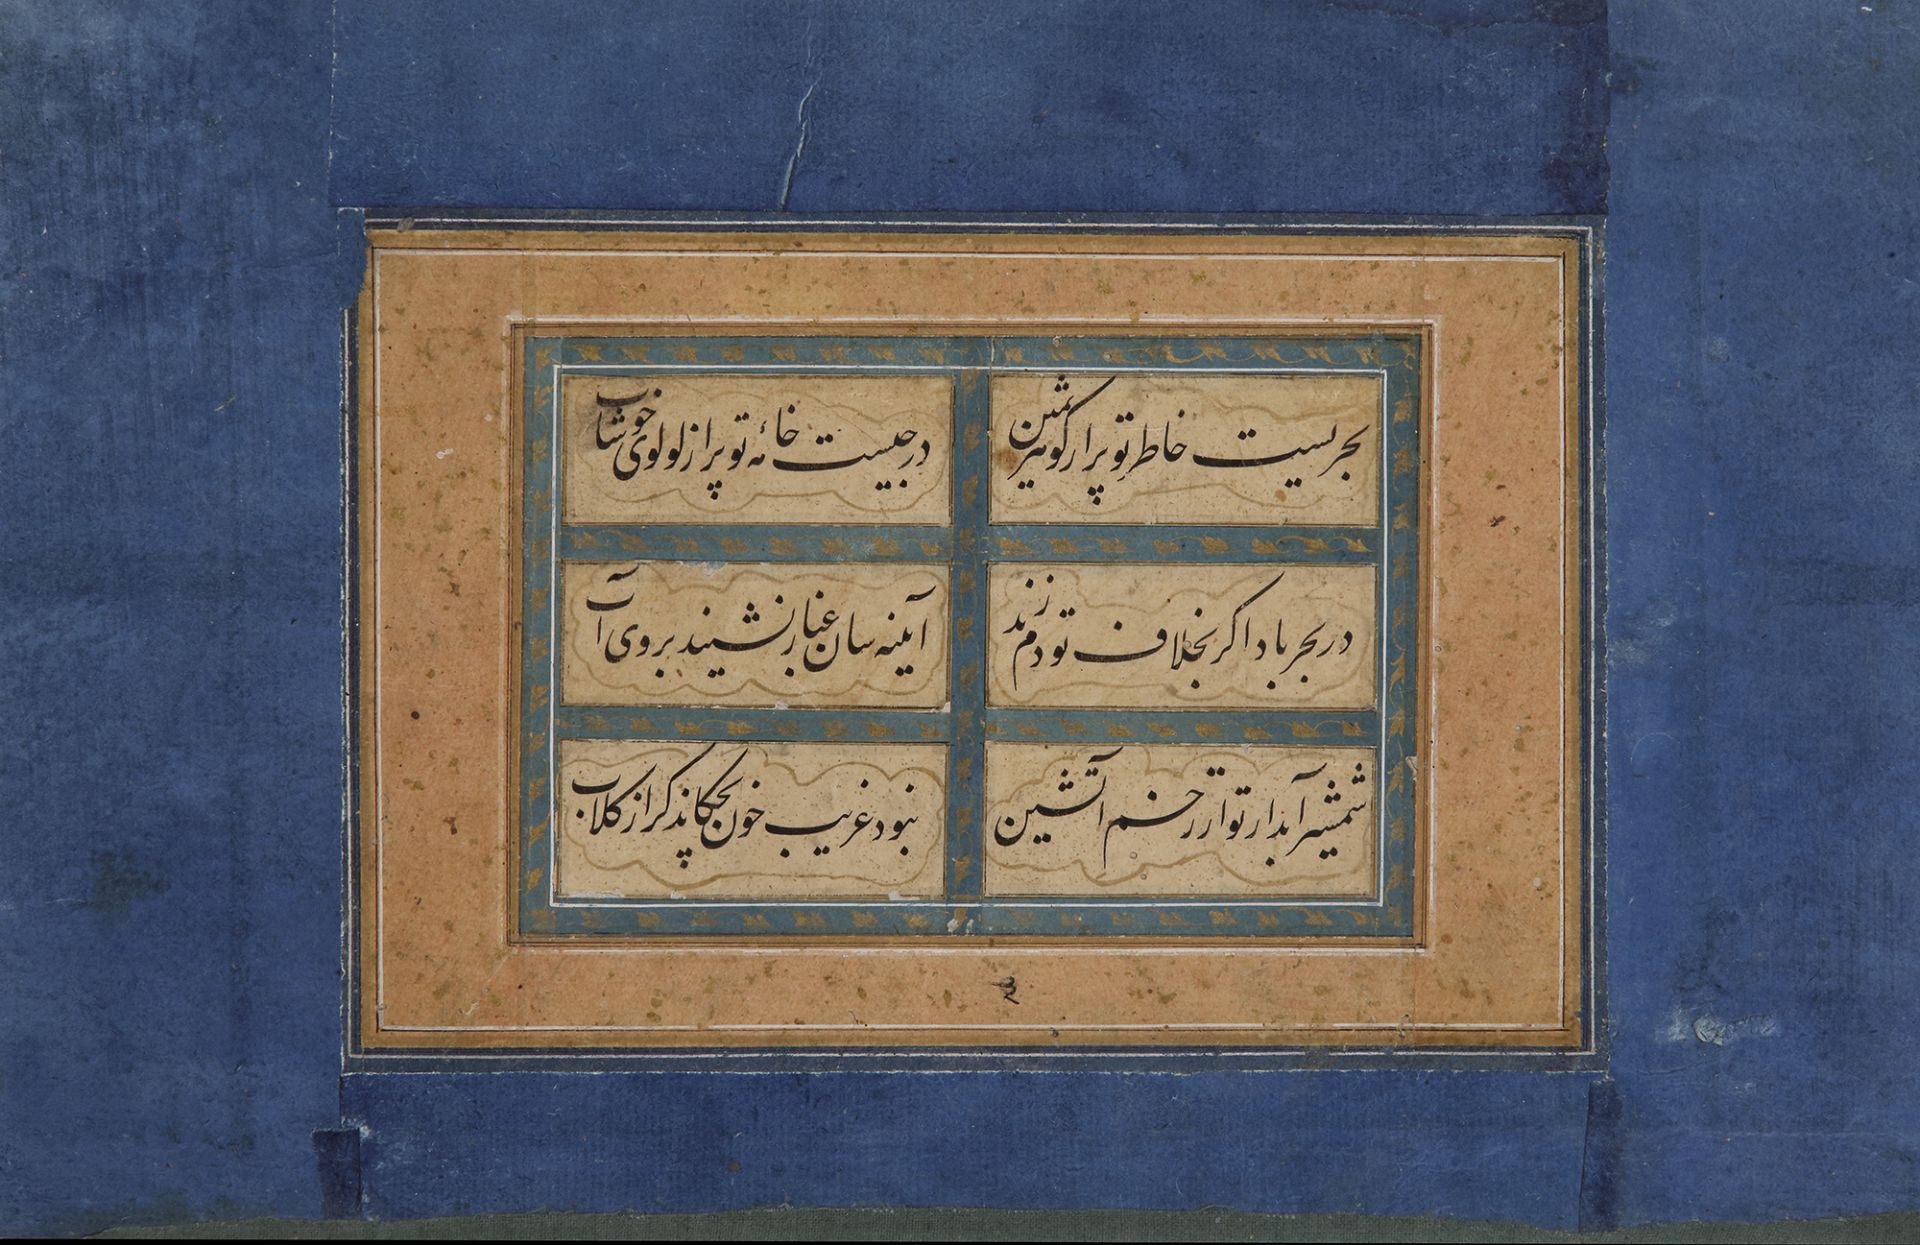 AN OTTOMAN CALLIGRAPHY PAGE FROM A MURAQQA ALBUM, TURKEY, 18TH CENTURY - Image 3 of 4